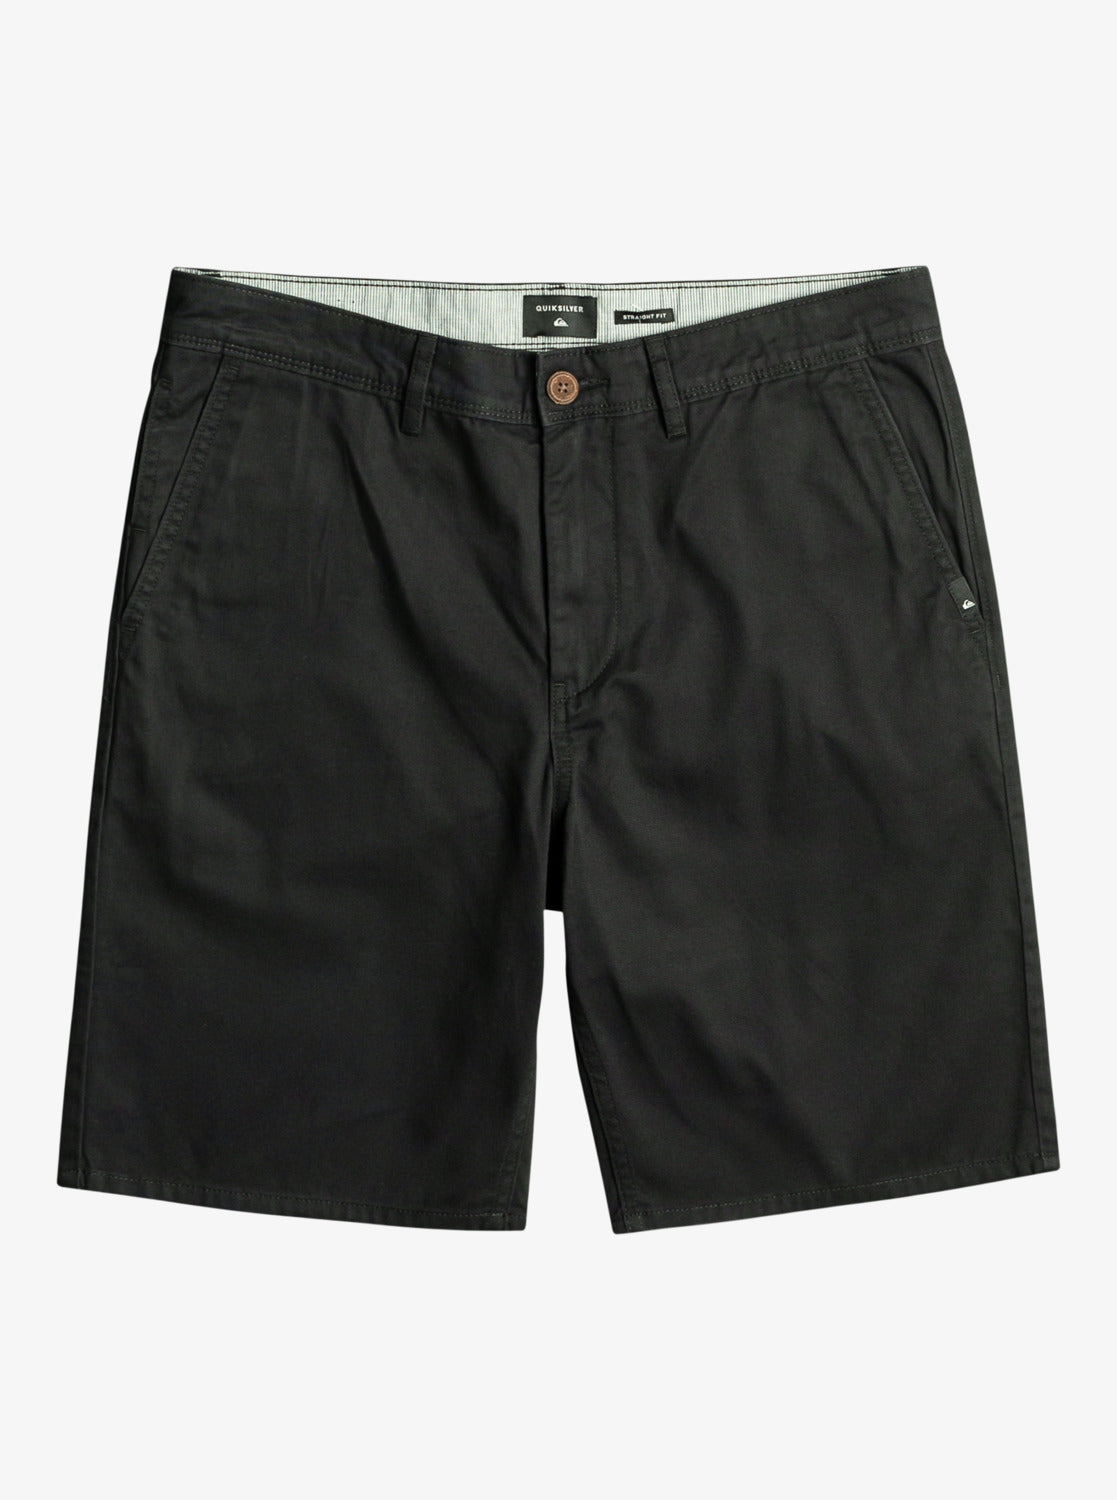 Quiksilver Everyday Chino Light Walkshorts in black from front in flat lay